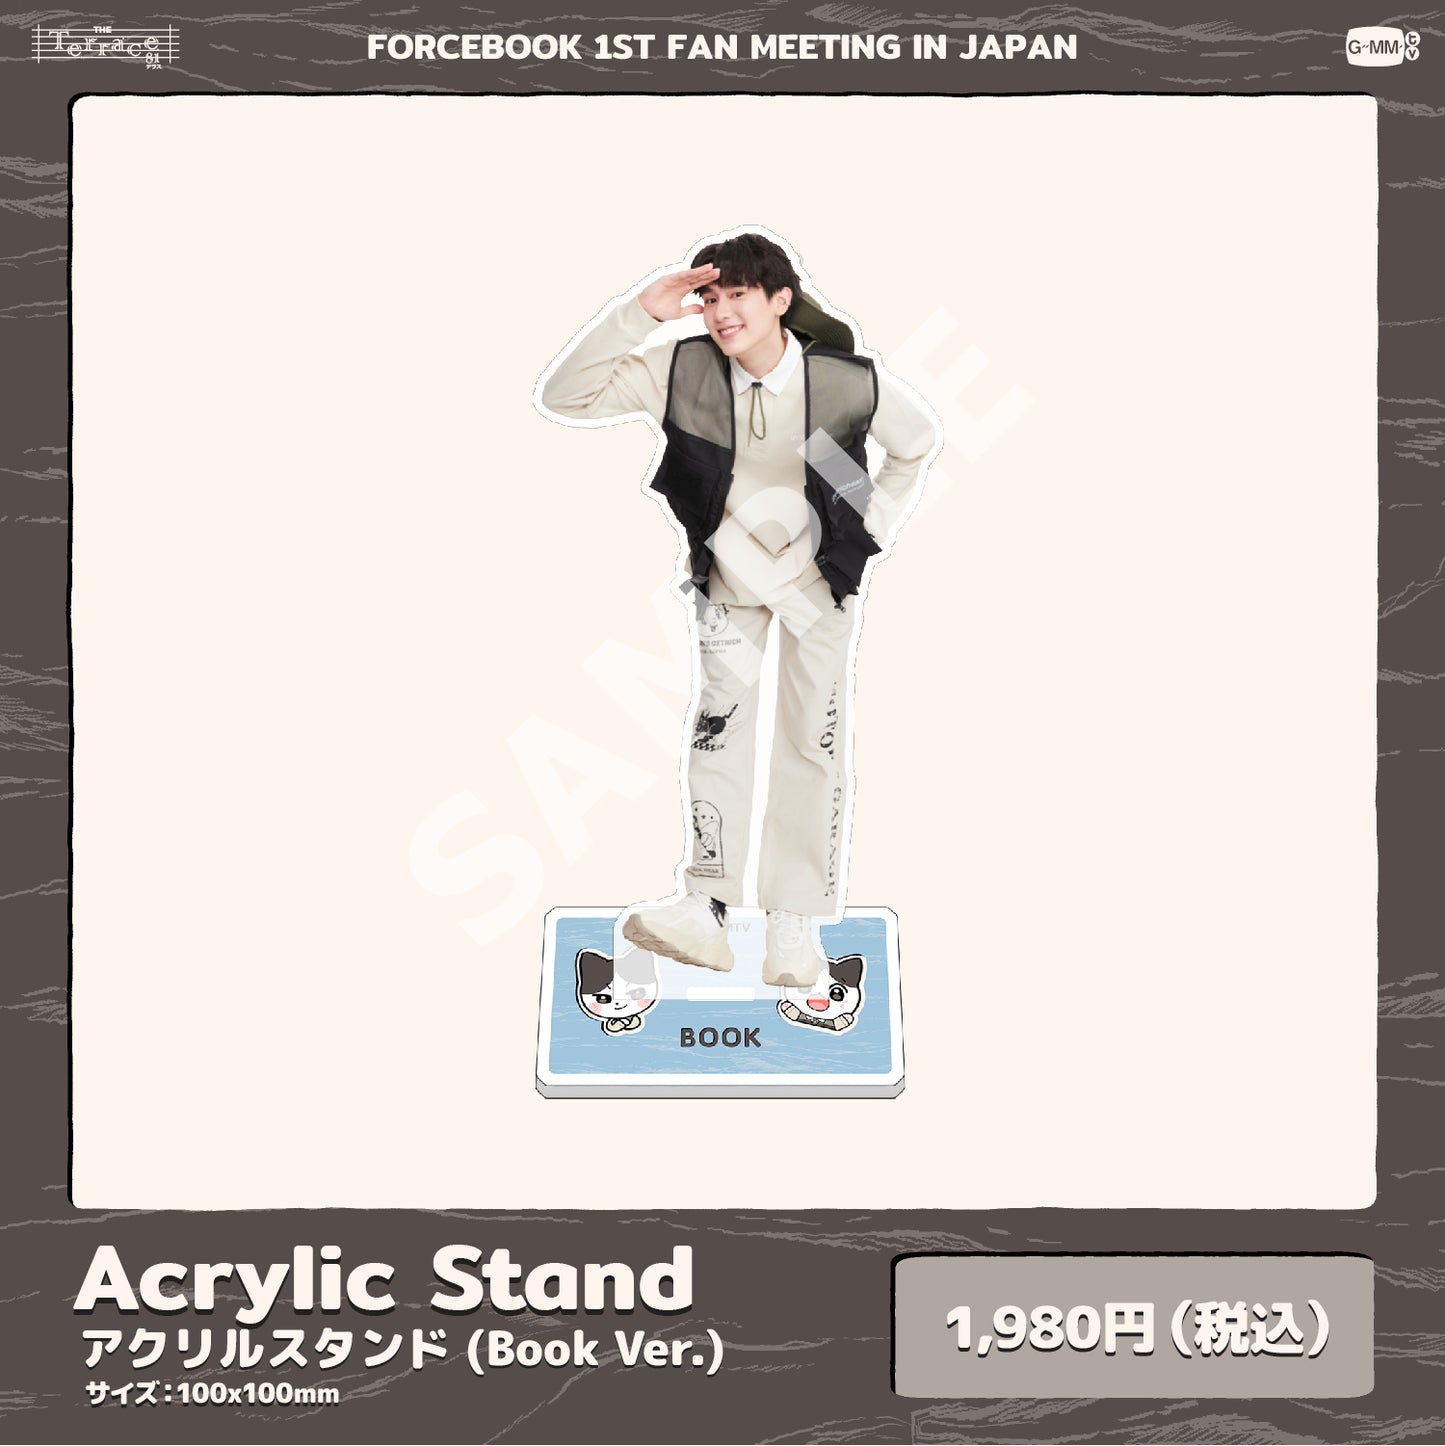 Acrylic Stand 6 (Book Ver.)